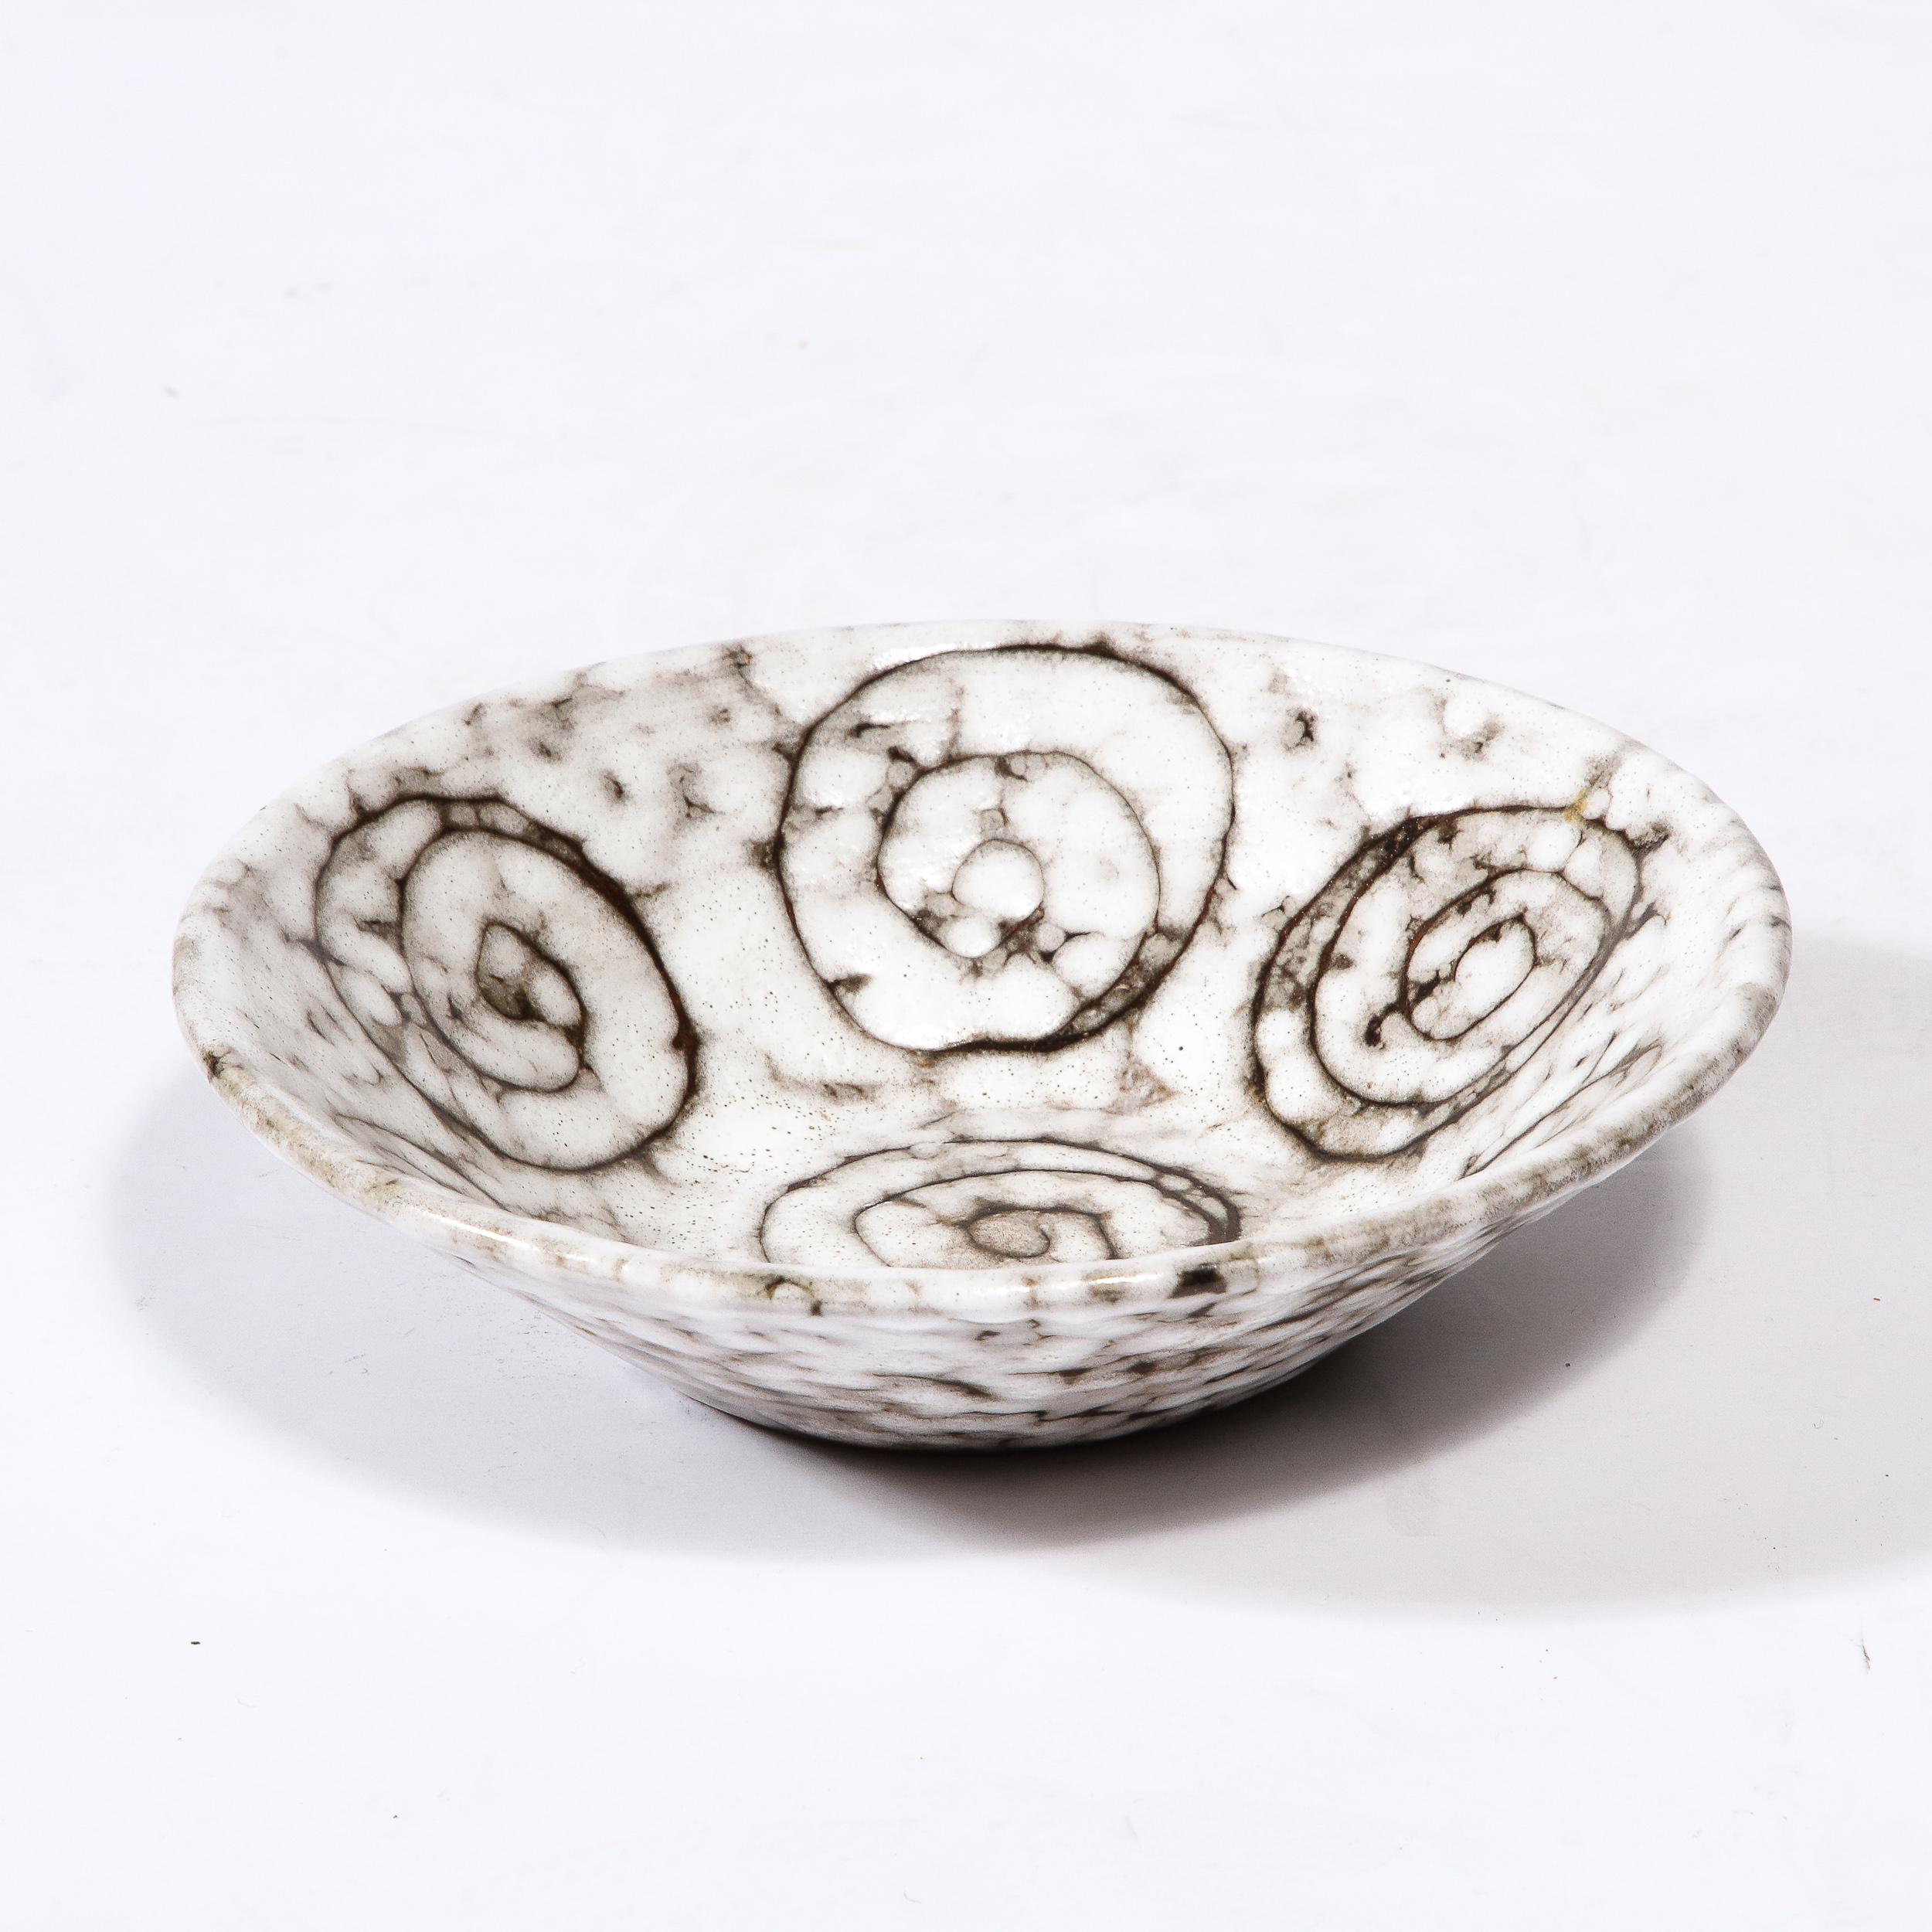 Hungarian Mid-Century Modernist White and Earth Toned Ceramic Dish W/ Seven Spirals